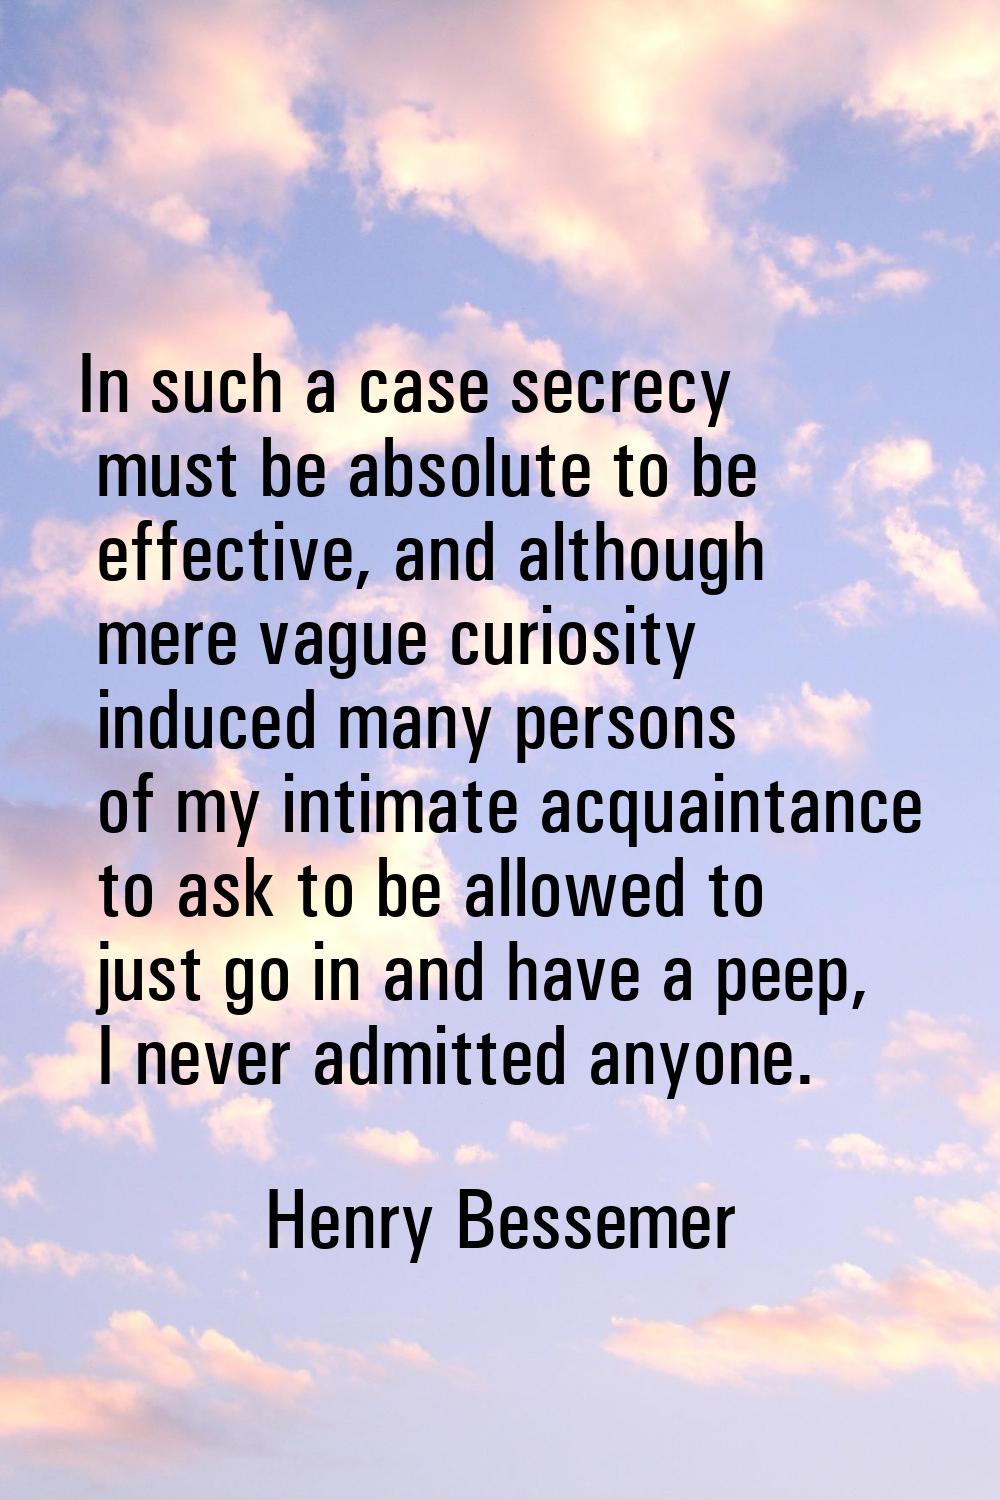 In such a case secrecy must be absolute to be effective, and although mere vague curiosity induced 